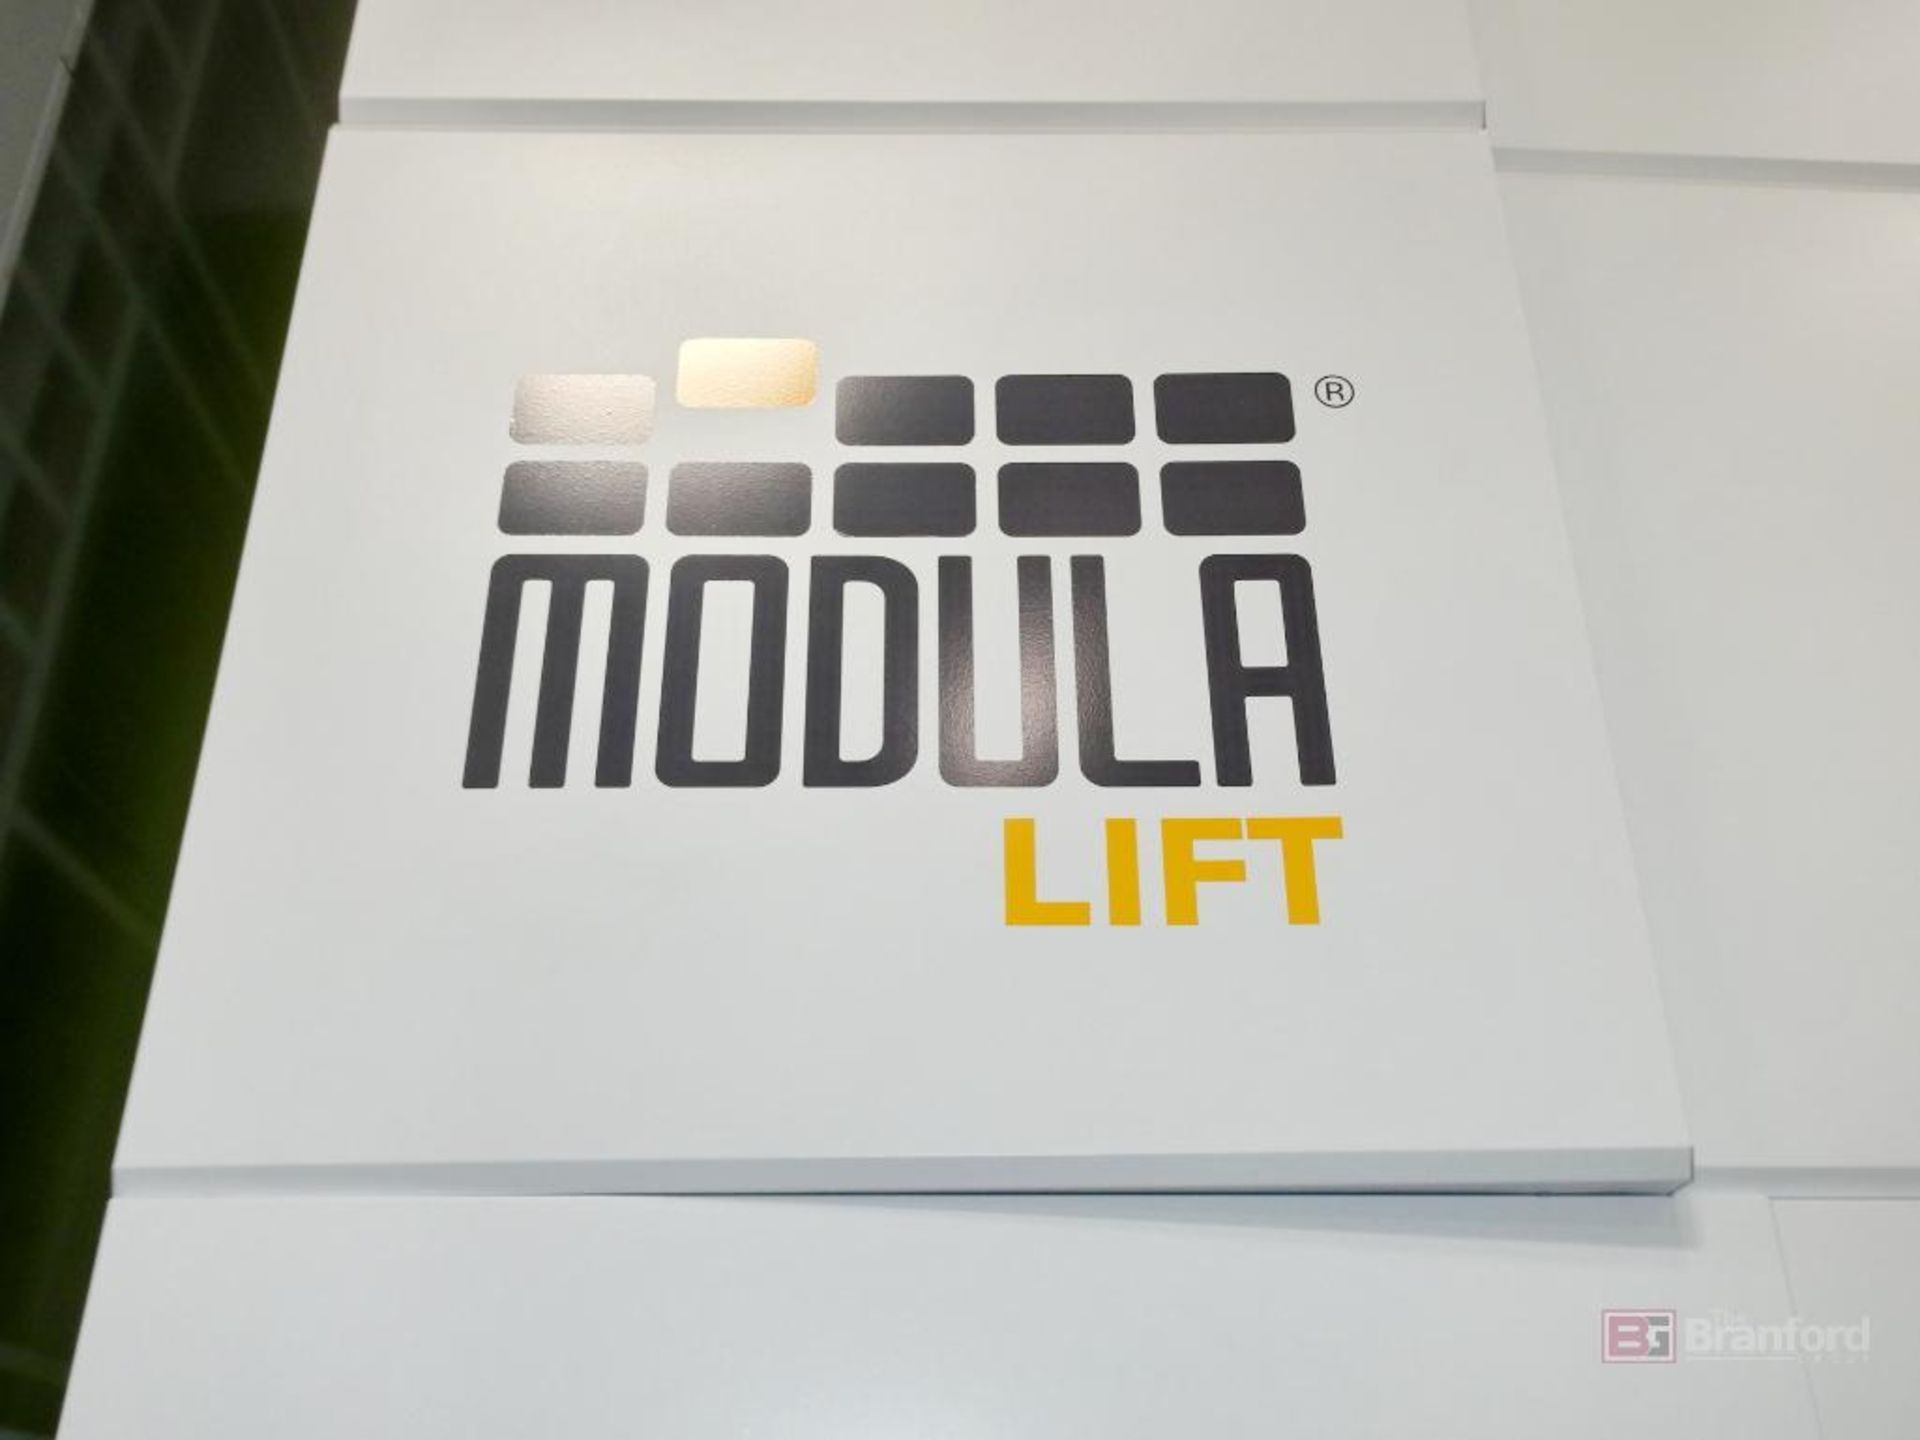 2021 Modula Lift Approx. Total Height 33'10" Model ML50D, Automated Vertical Storage System - Image 5 of 7